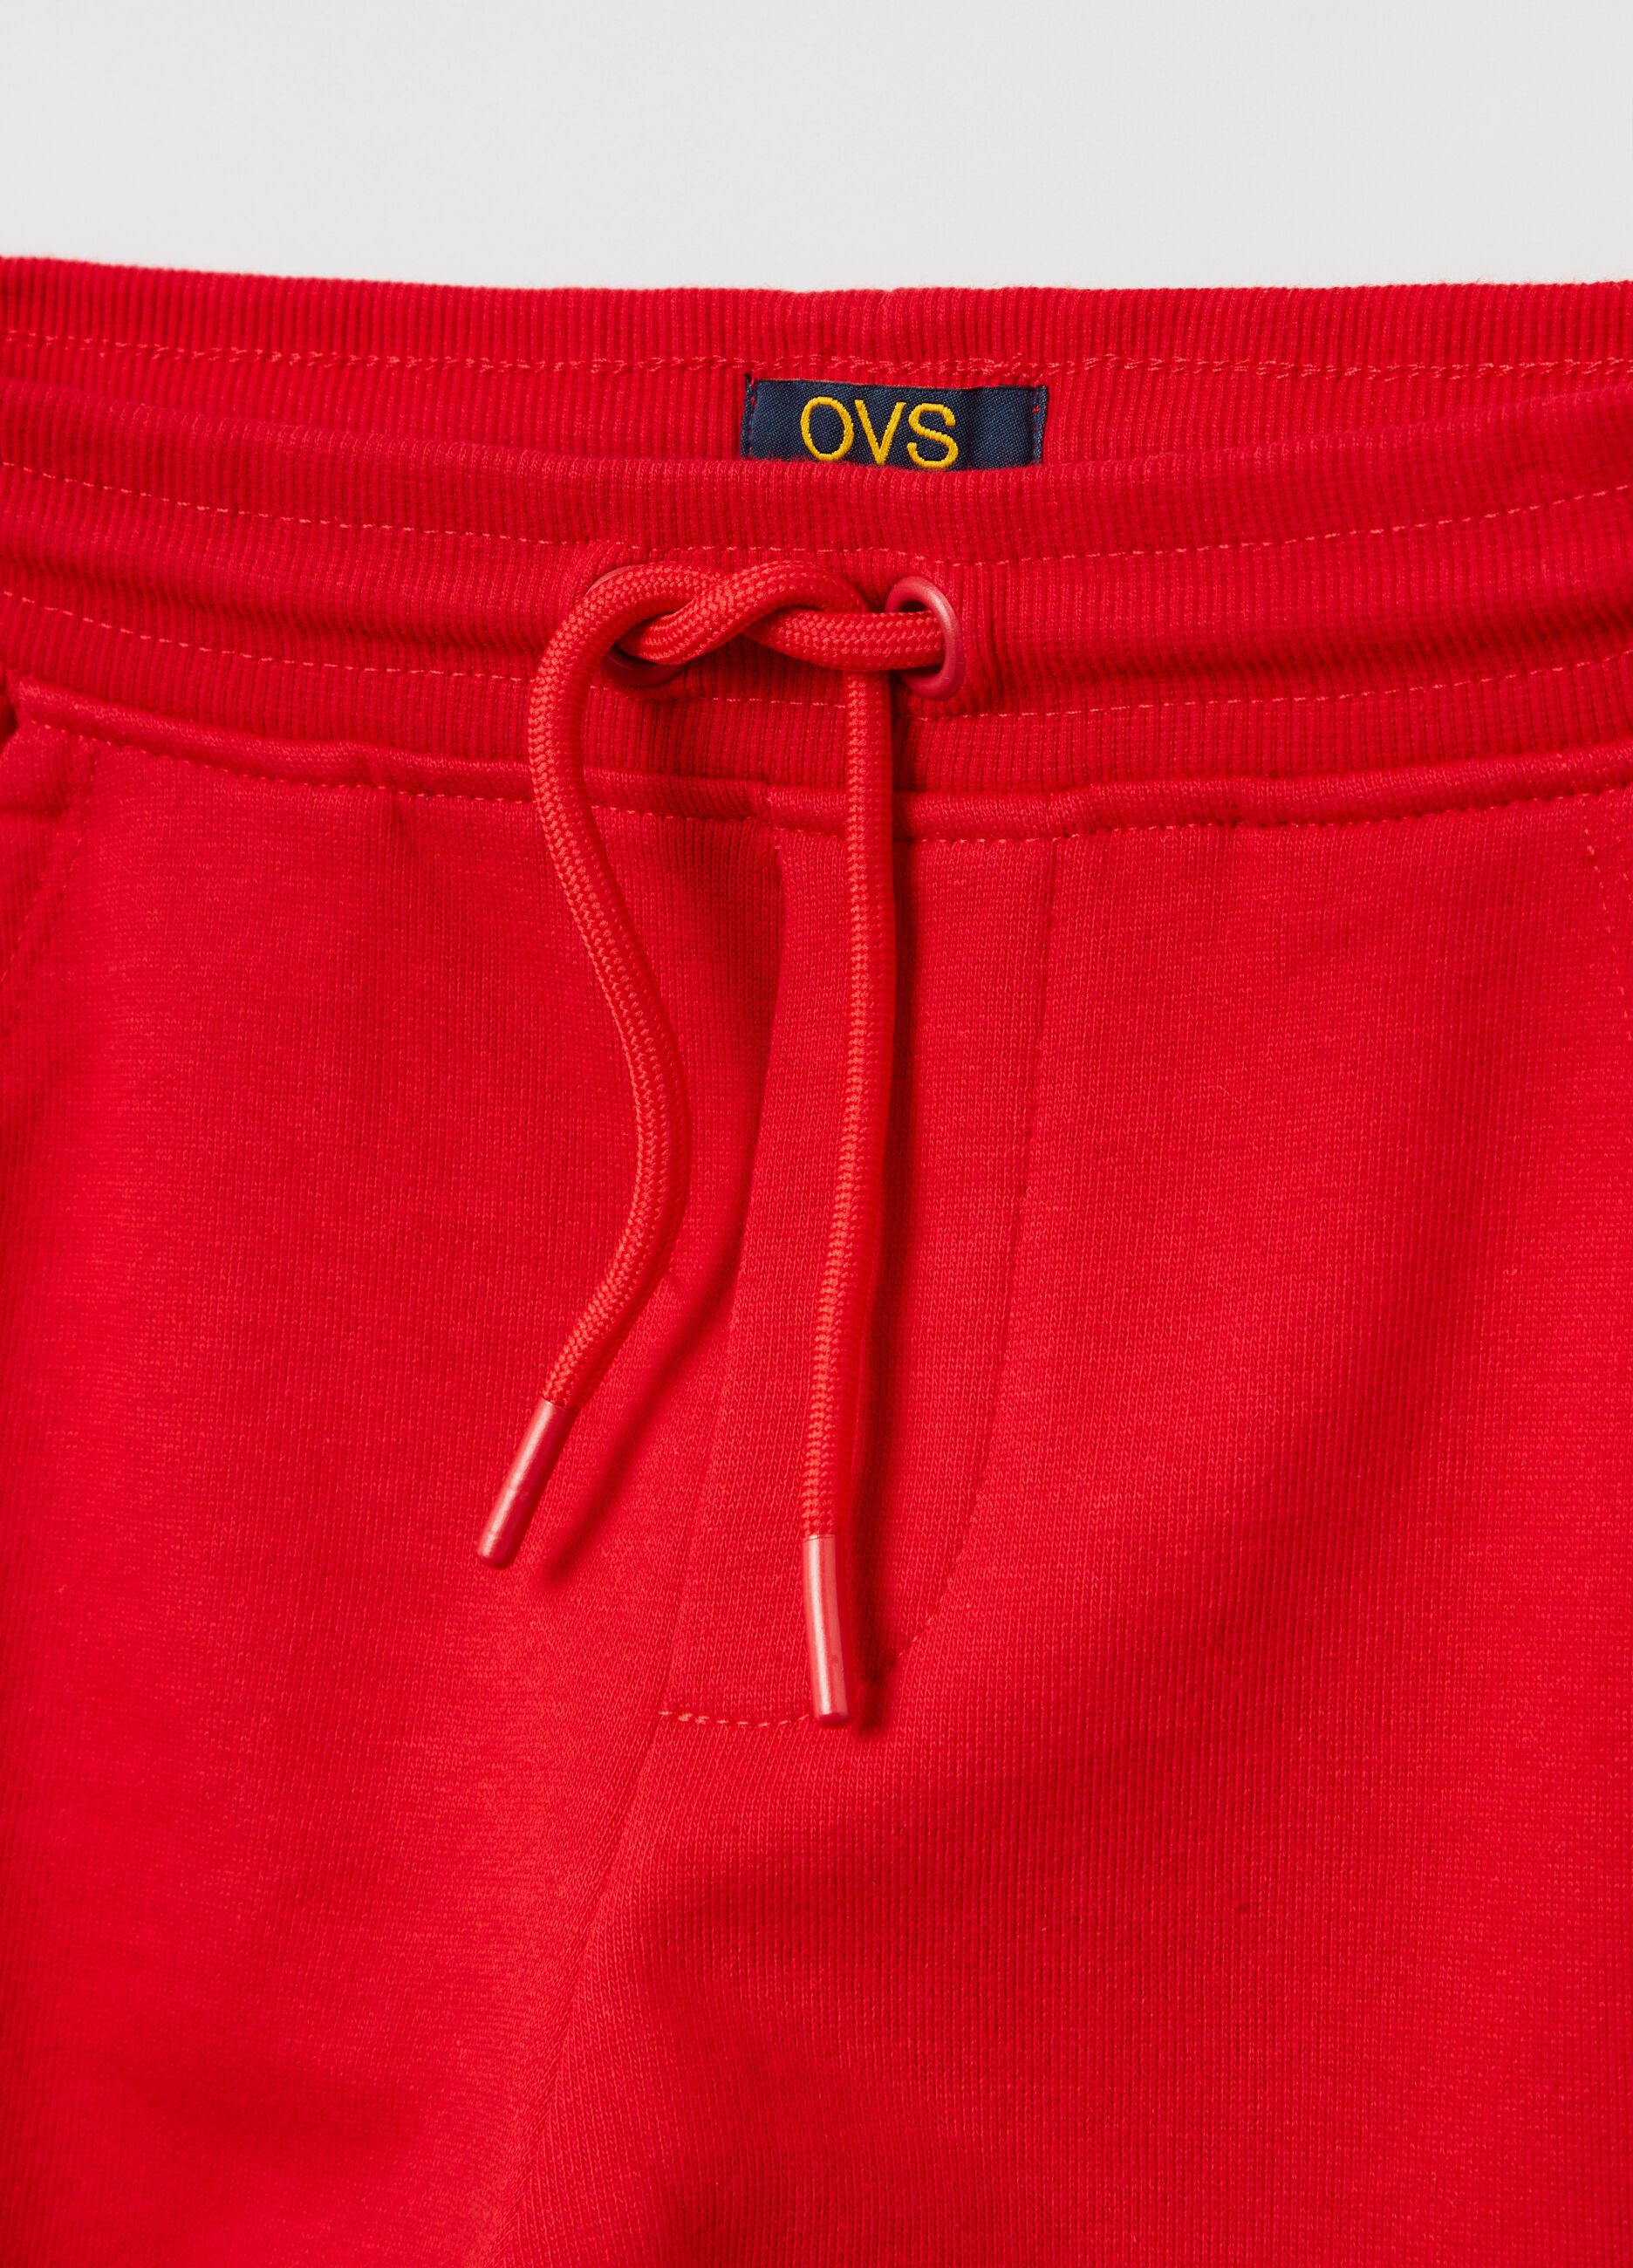 Fitness joggers in cotton with drawstring